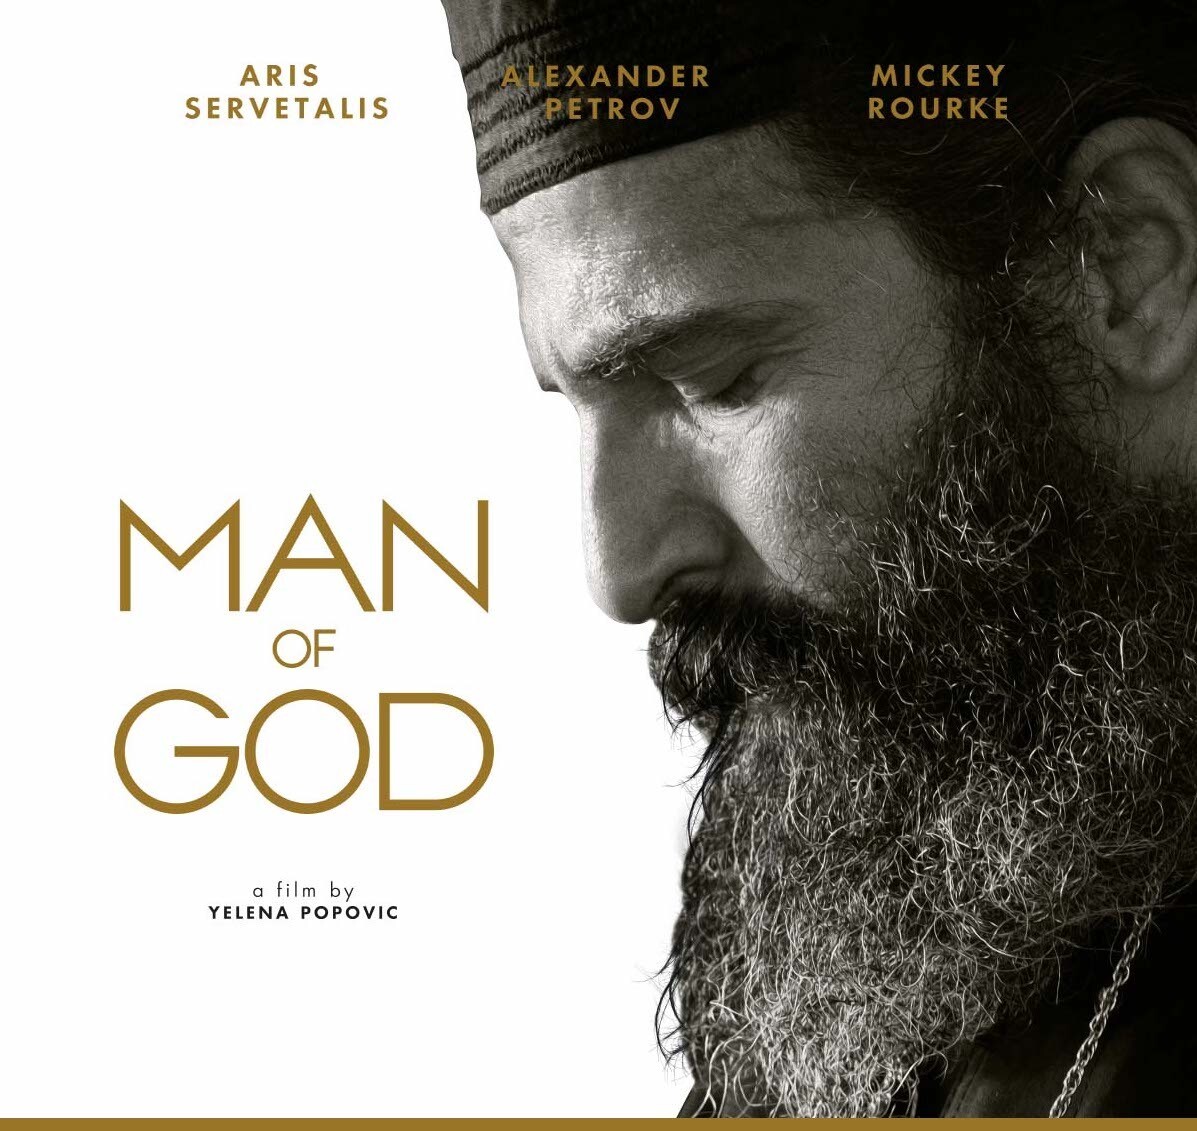 Ticket to 'Man of God' Private Screening - Sunday 29 May